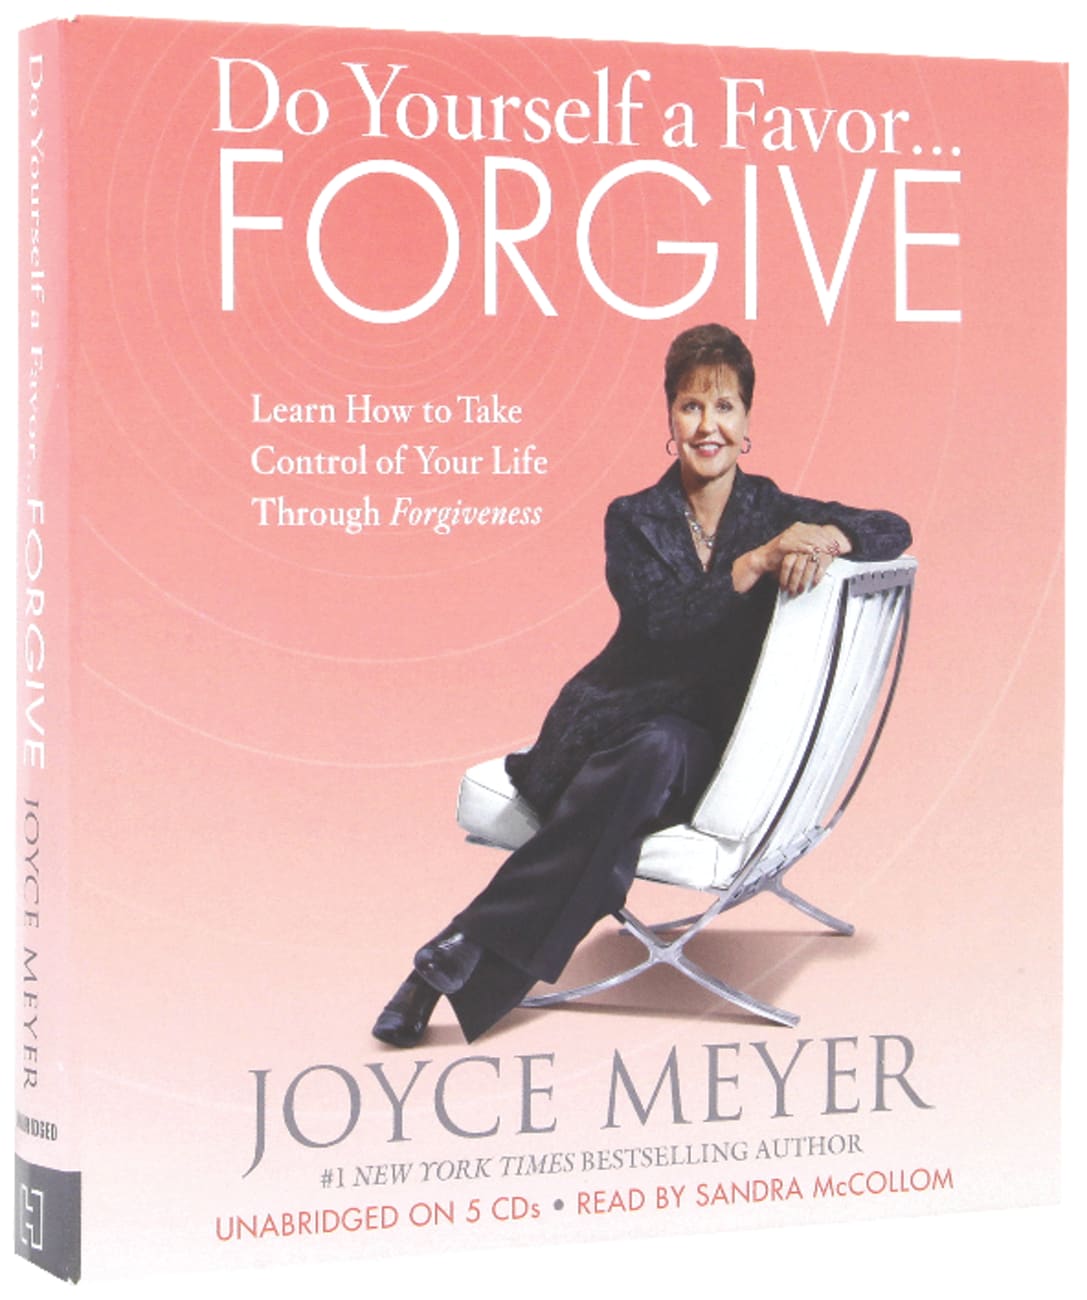 Do Yourself a Favor...Forgive (Unabridged, 5cds) Compact Disc